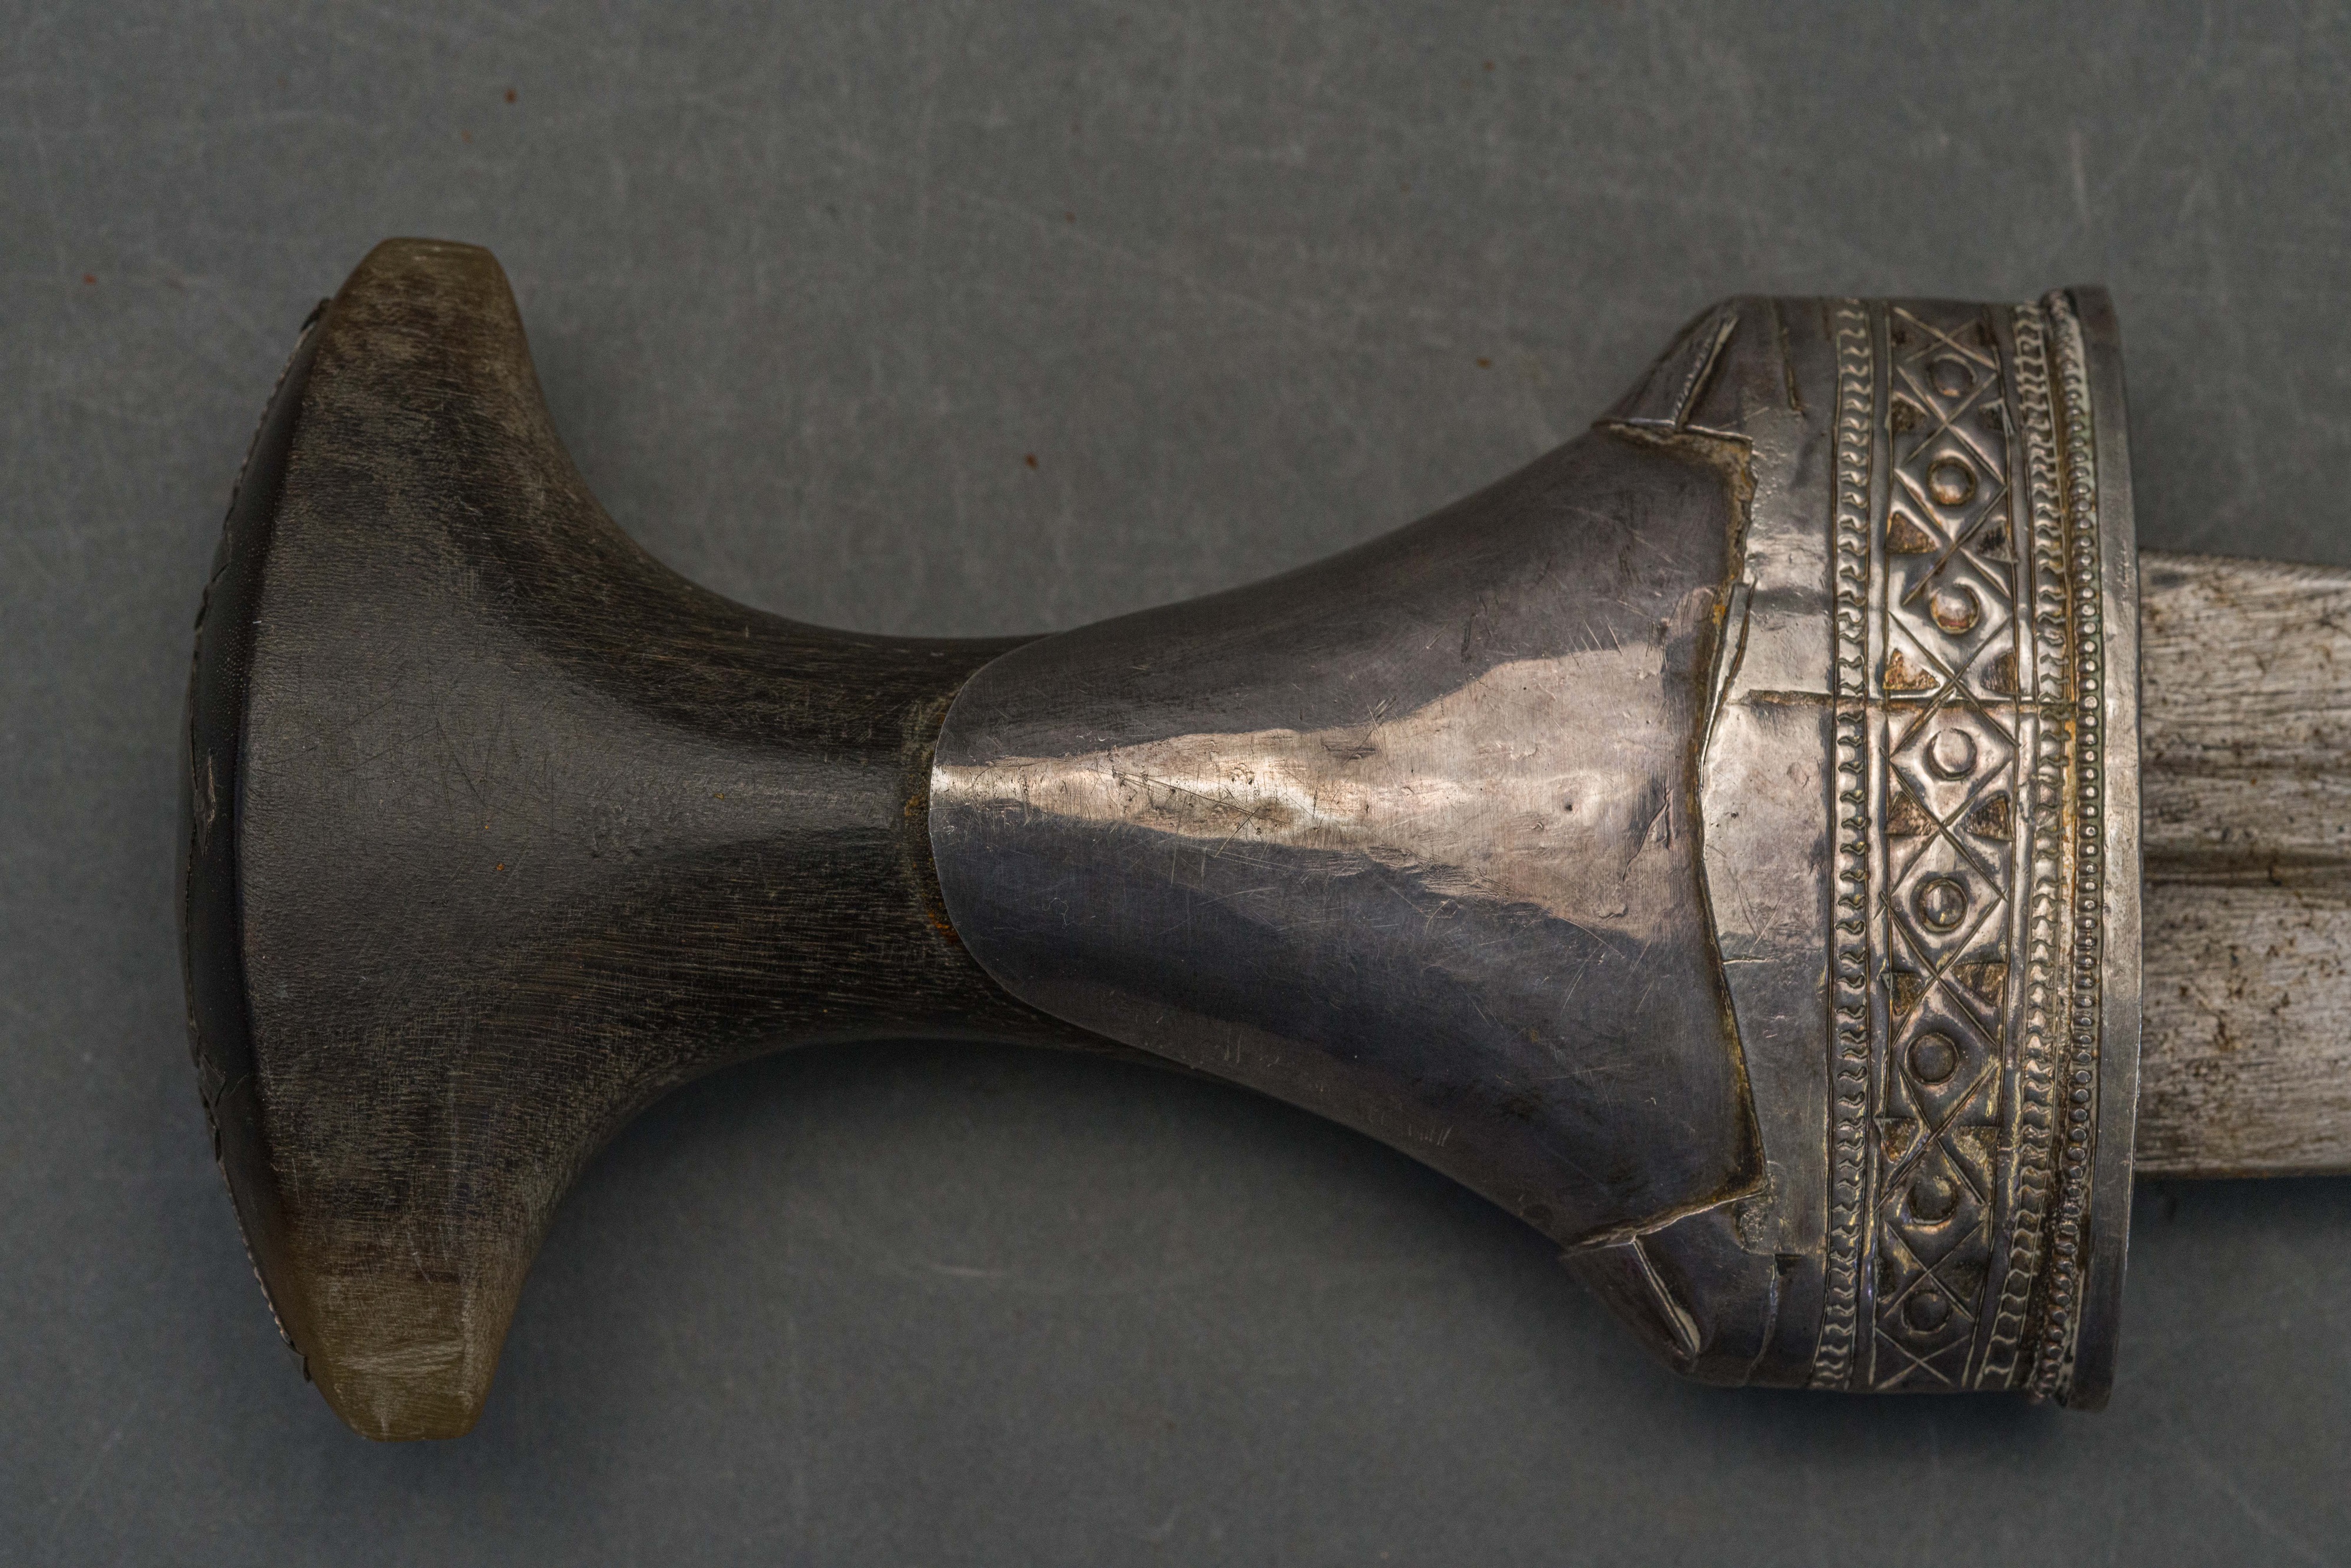 AN ARAB DAGGER (JAMBIYA) WITH SILVER-MOUNTED HILT, EARLY 20TH CENTURY - Image 5 of 10